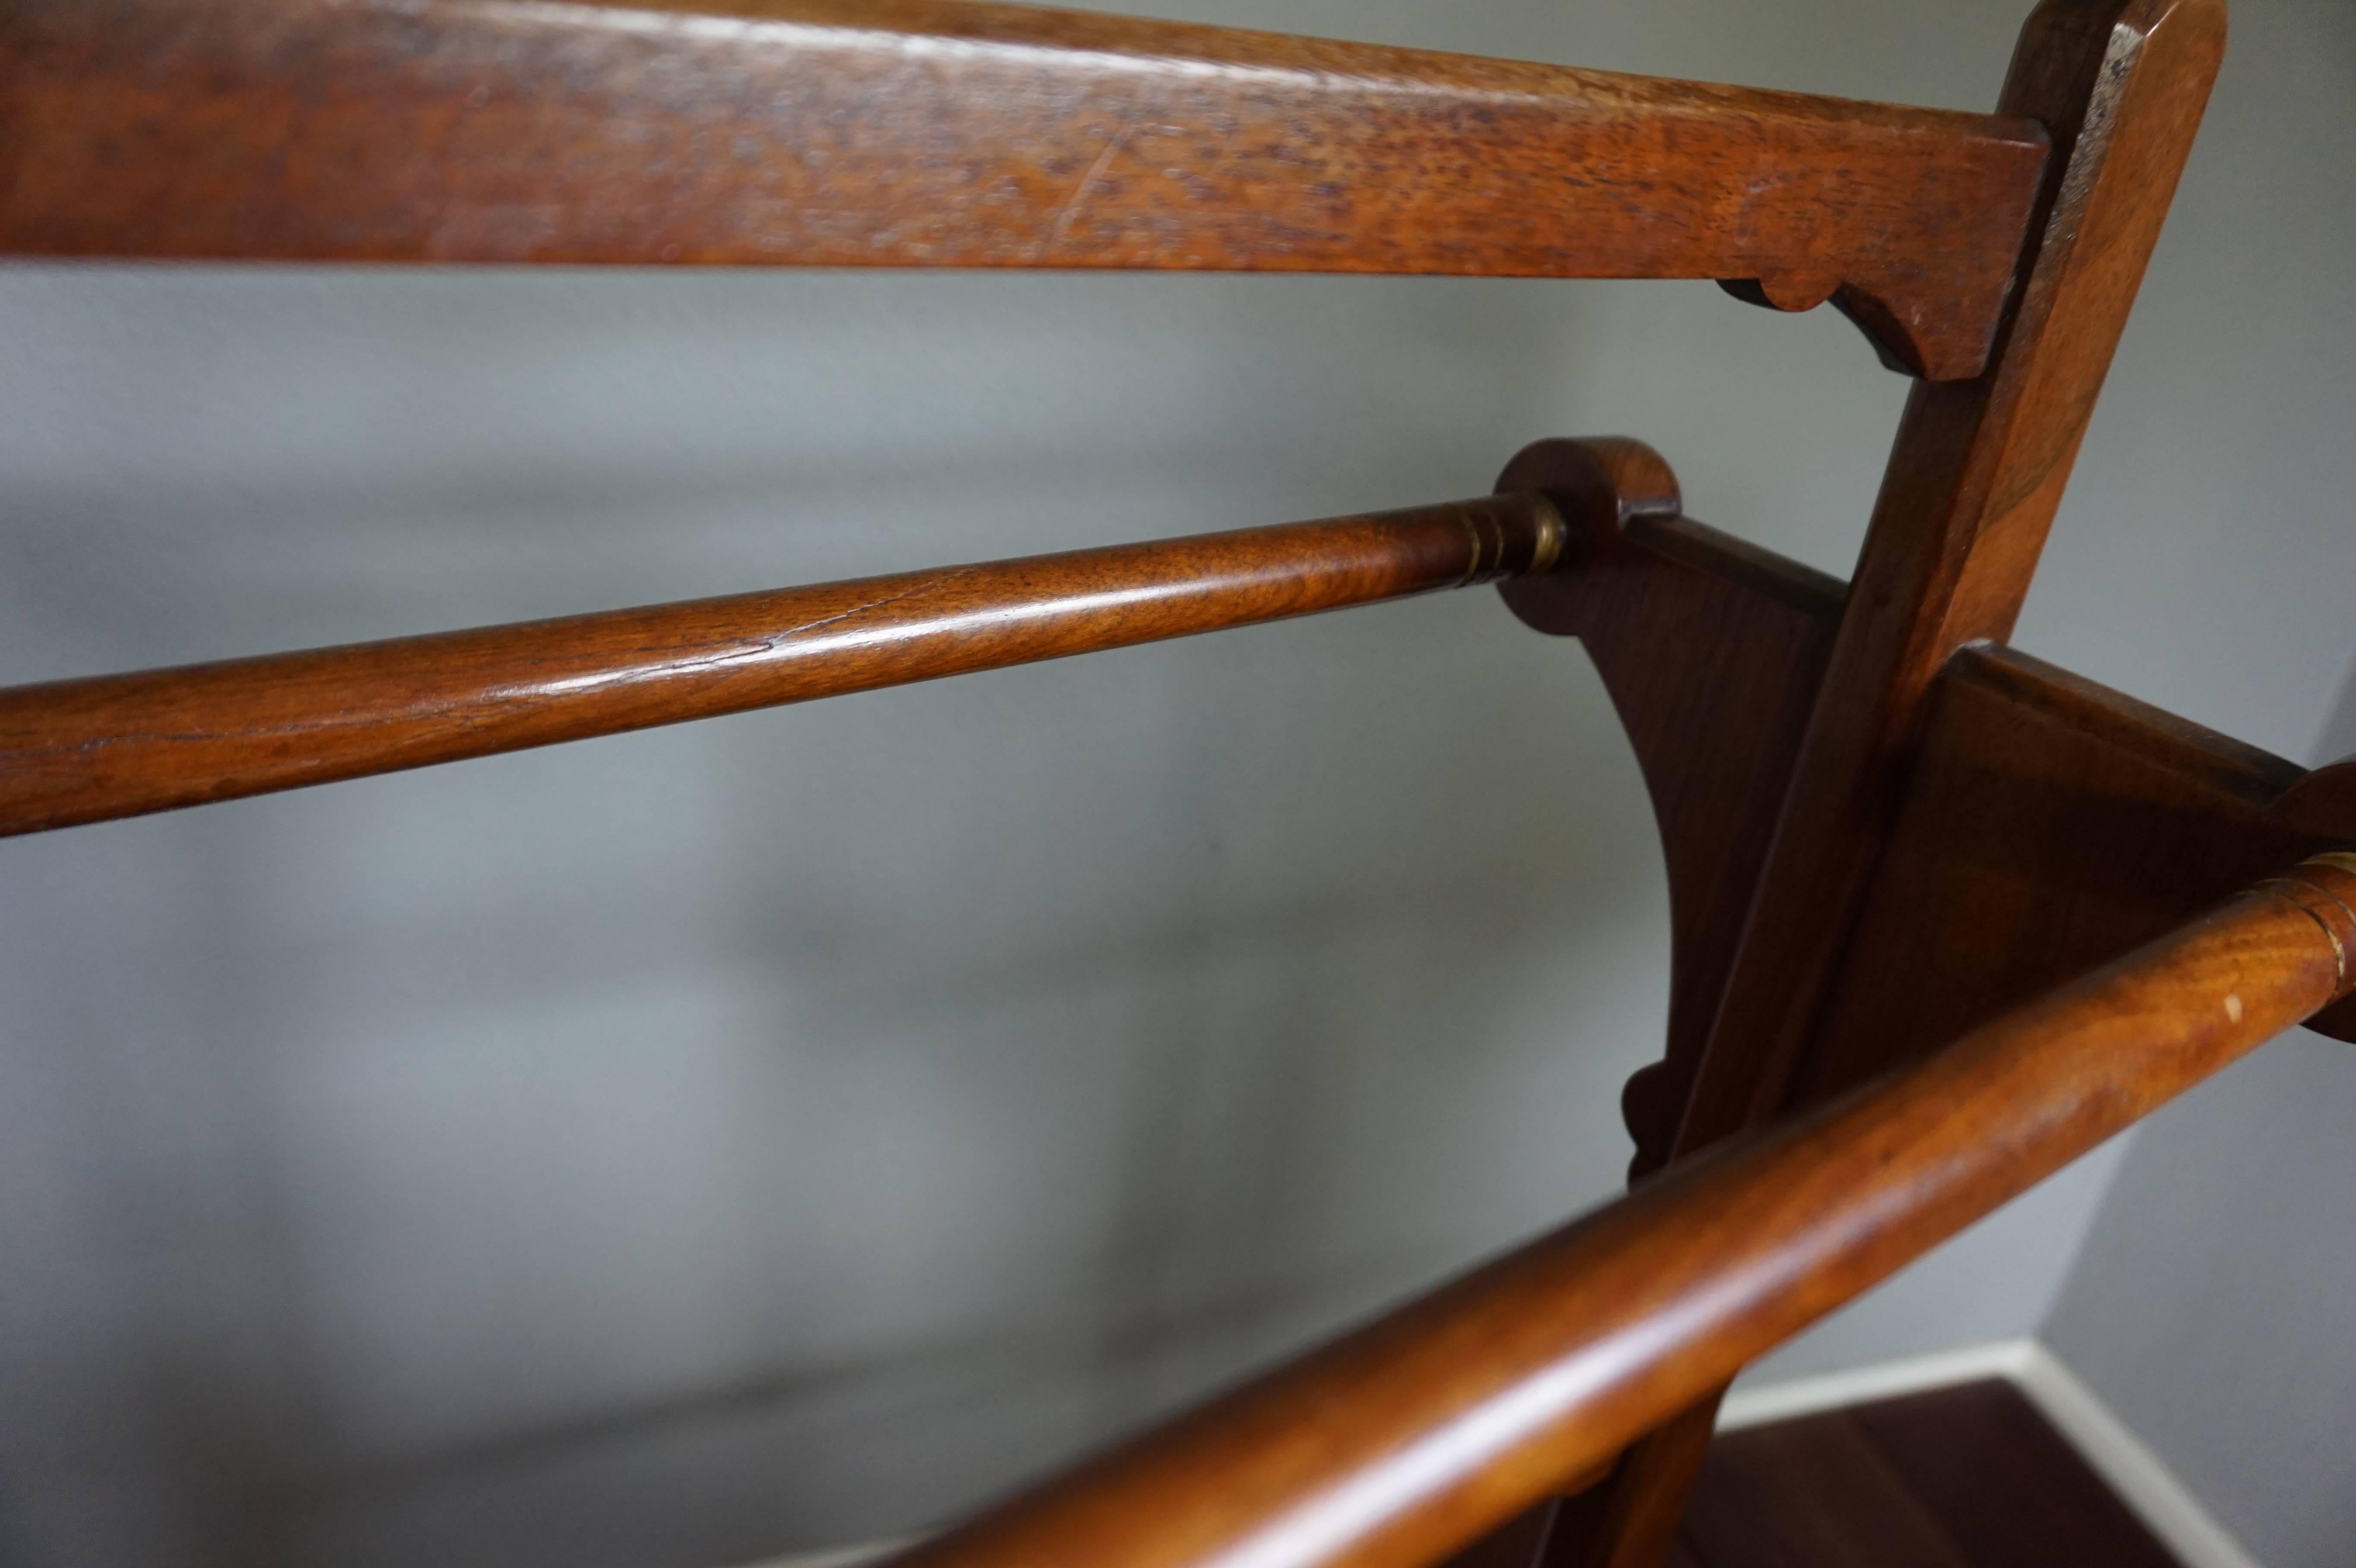 Nutwood Arts & Crafts Walnut Towel Rack by Gillow & Co Attributed to Bruce James Talbert